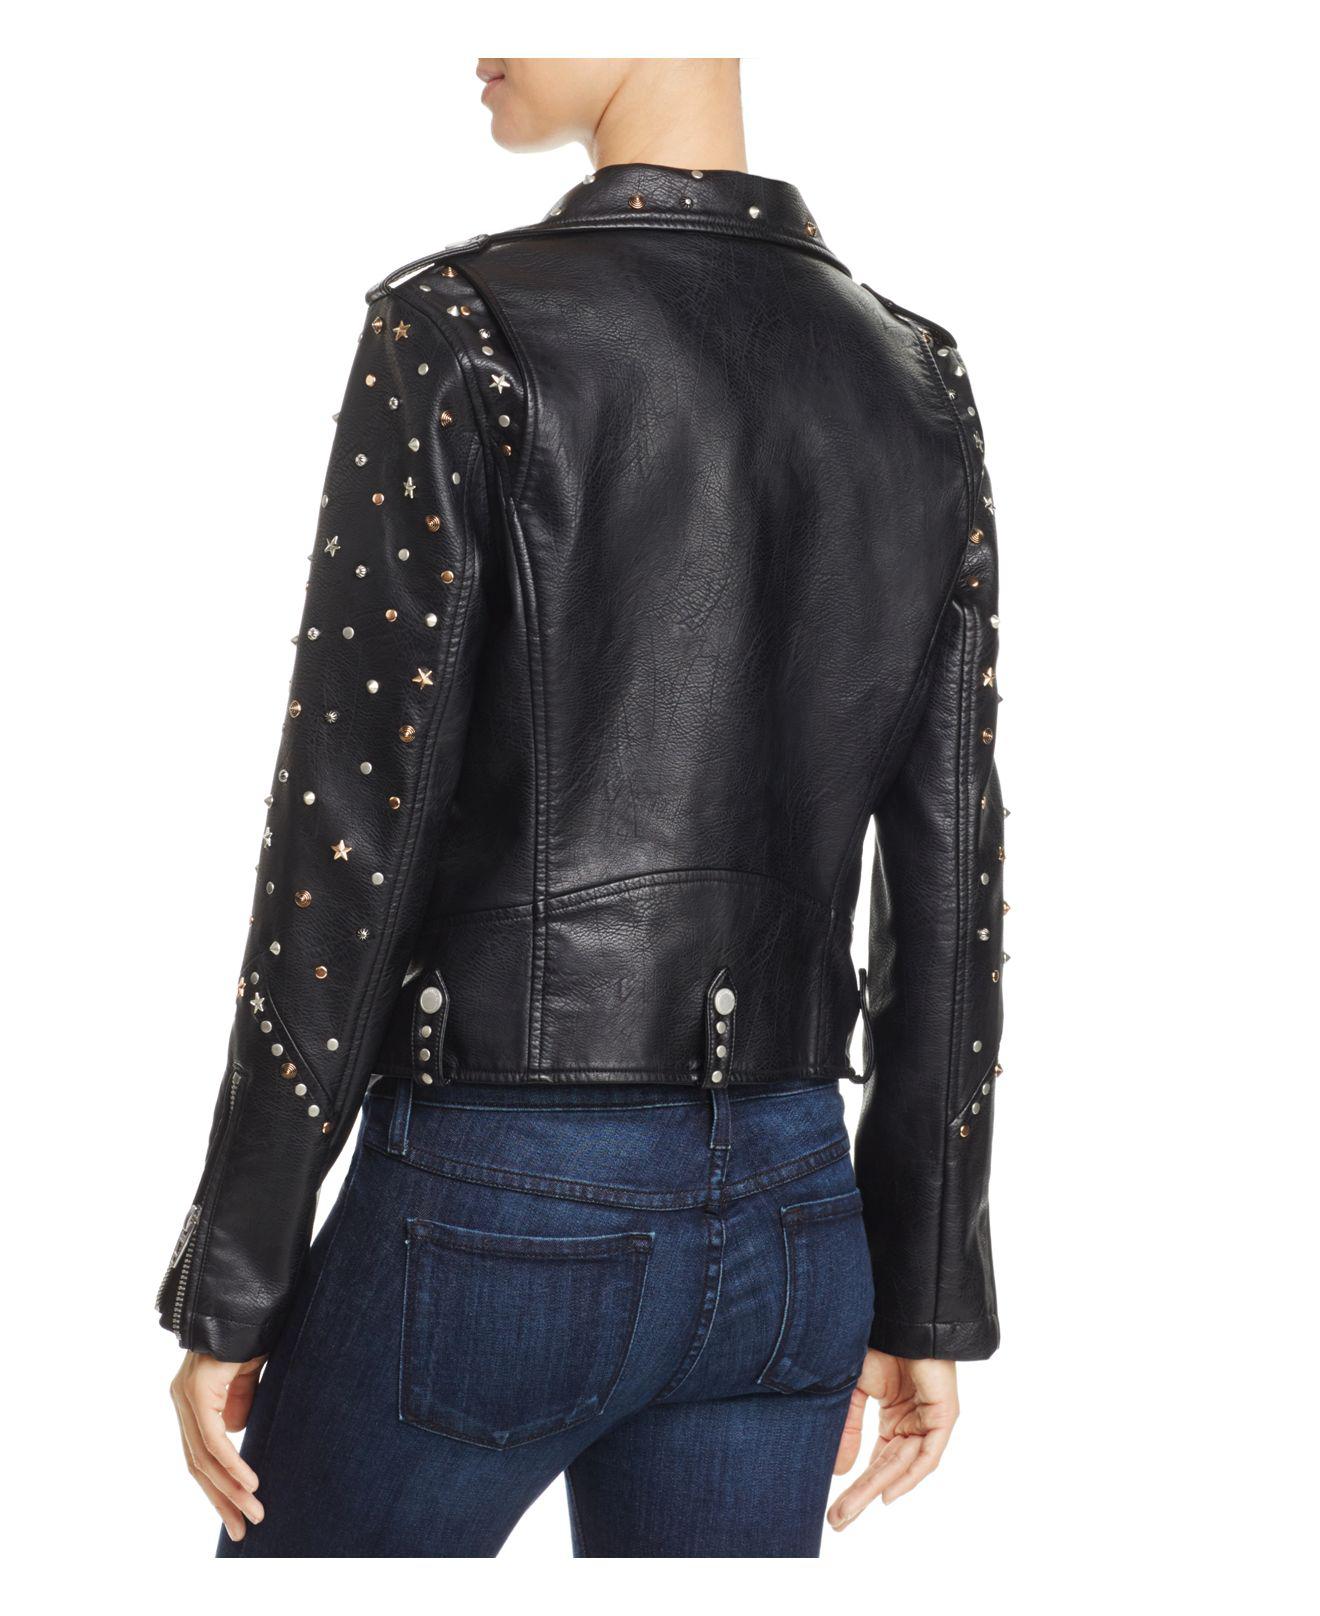 Lyst - Blank Nyc Studded Faux Leather Motorcycle Jacket in Black